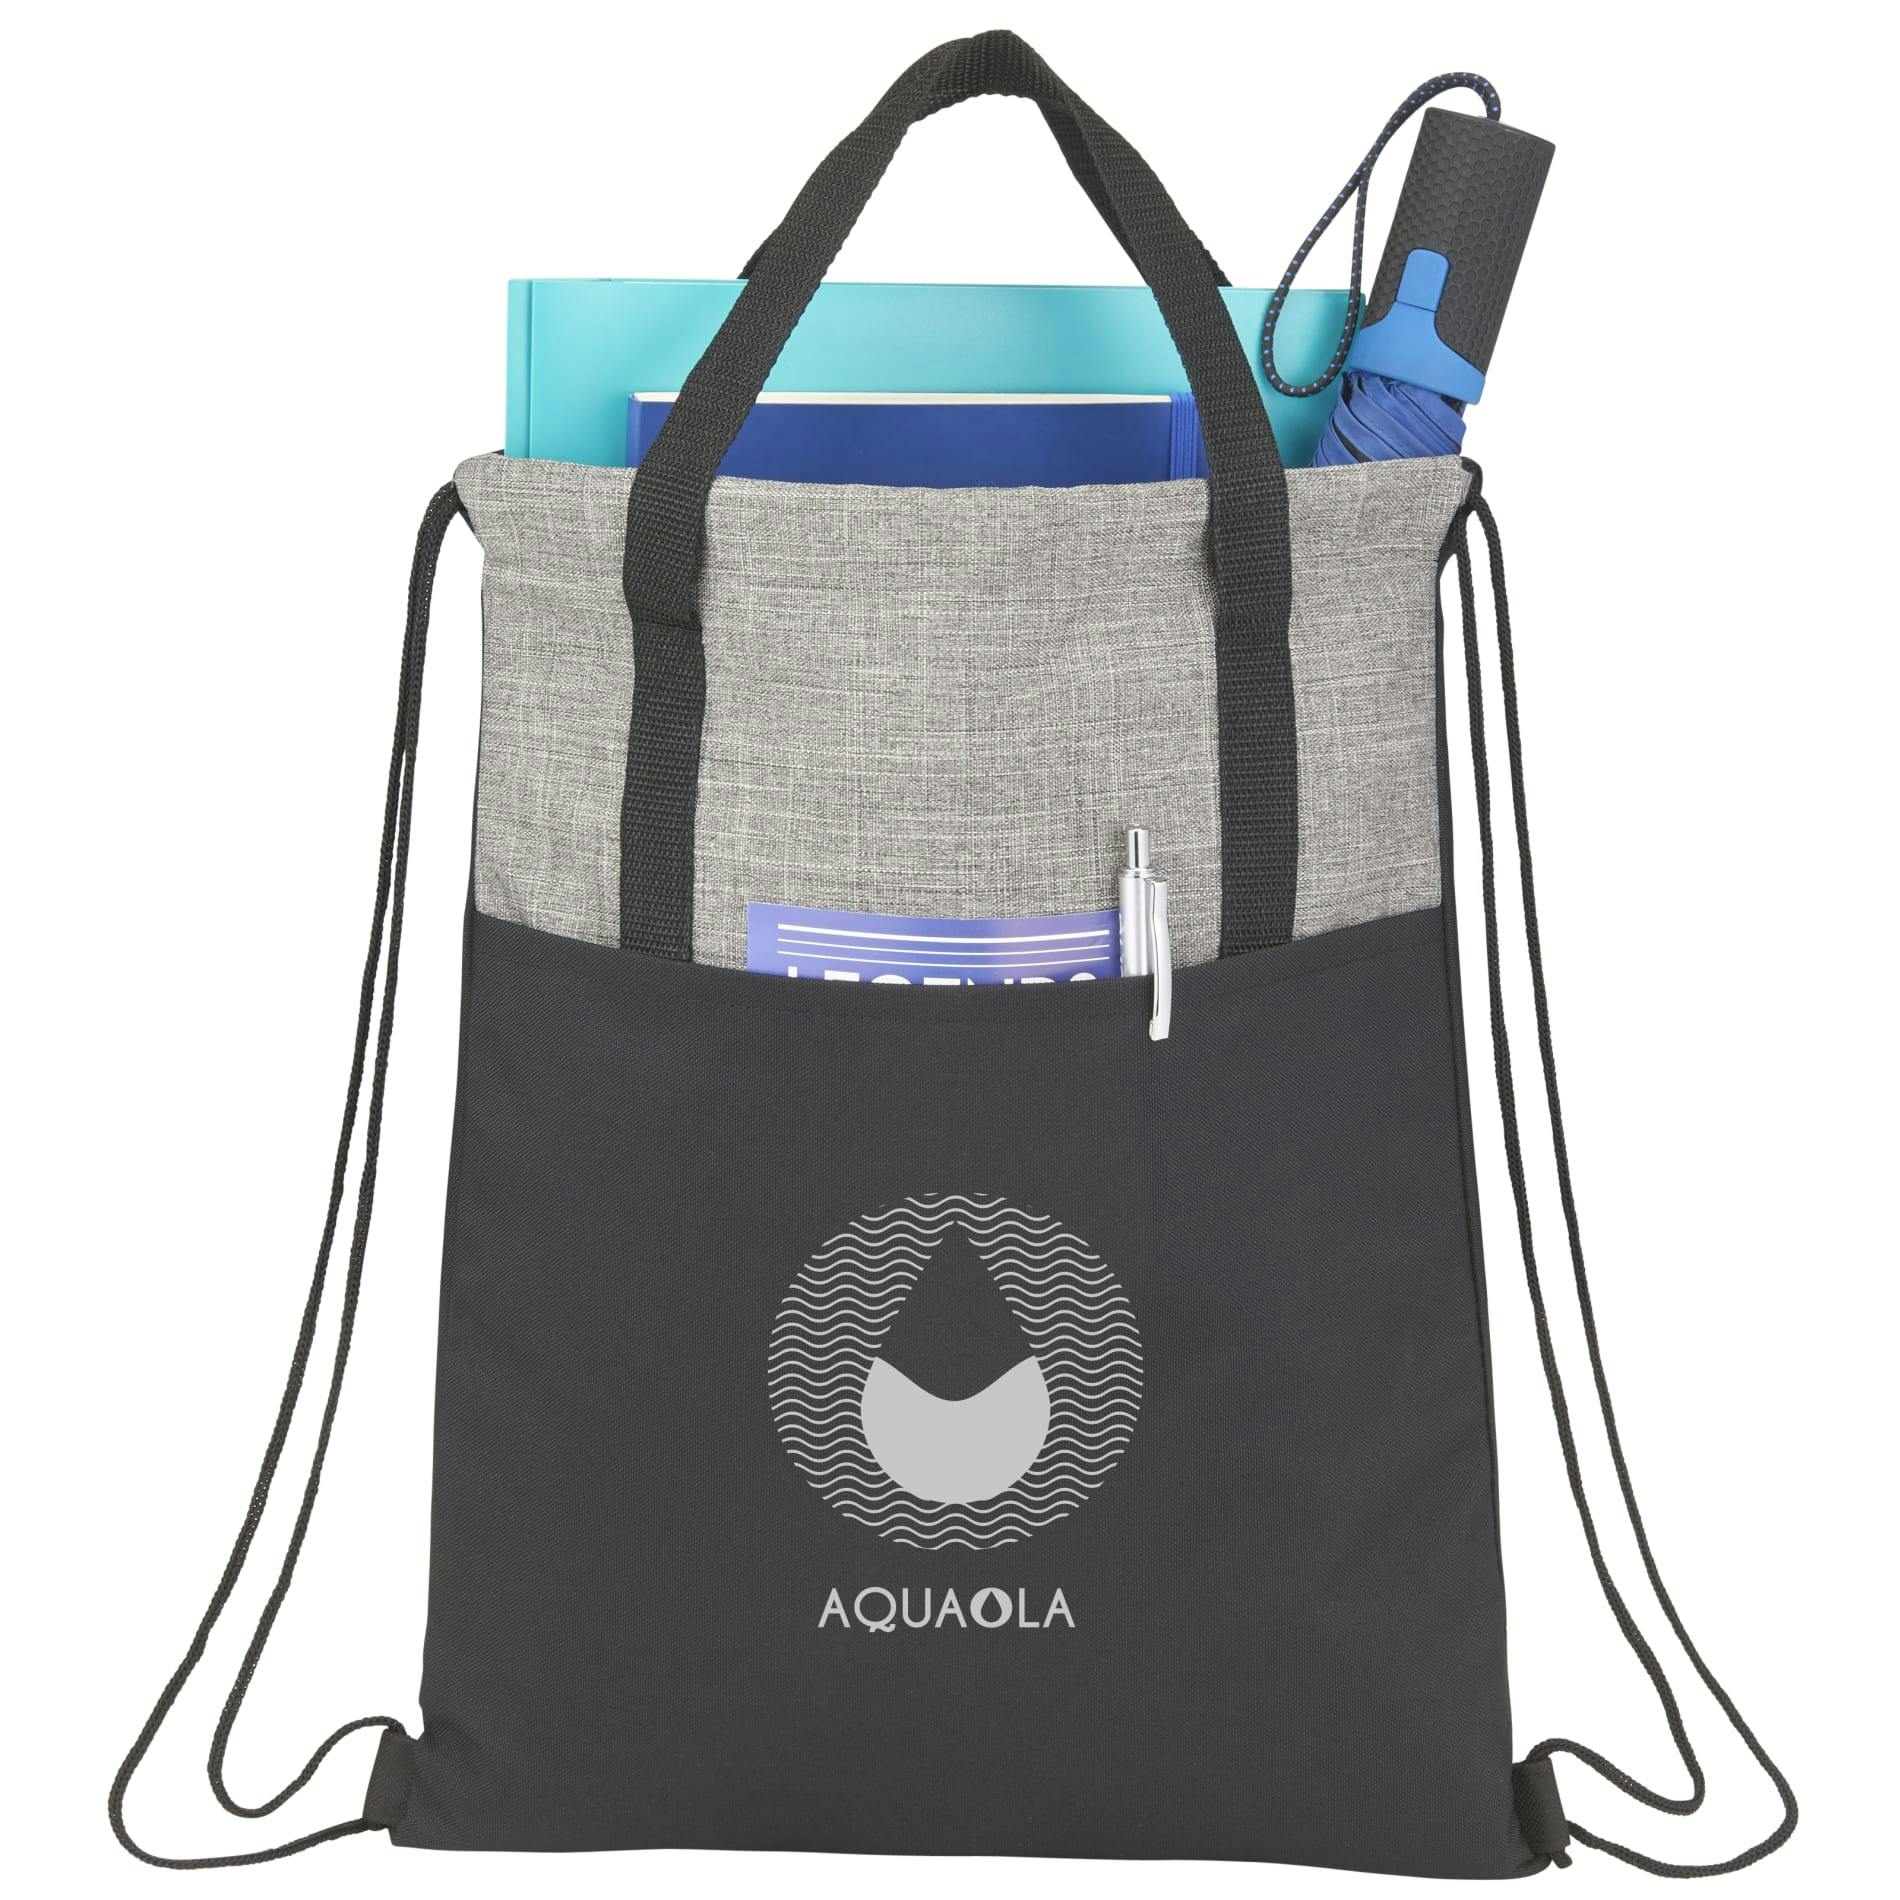 Cycle Recycled Drawstring Bag - additional Image 1